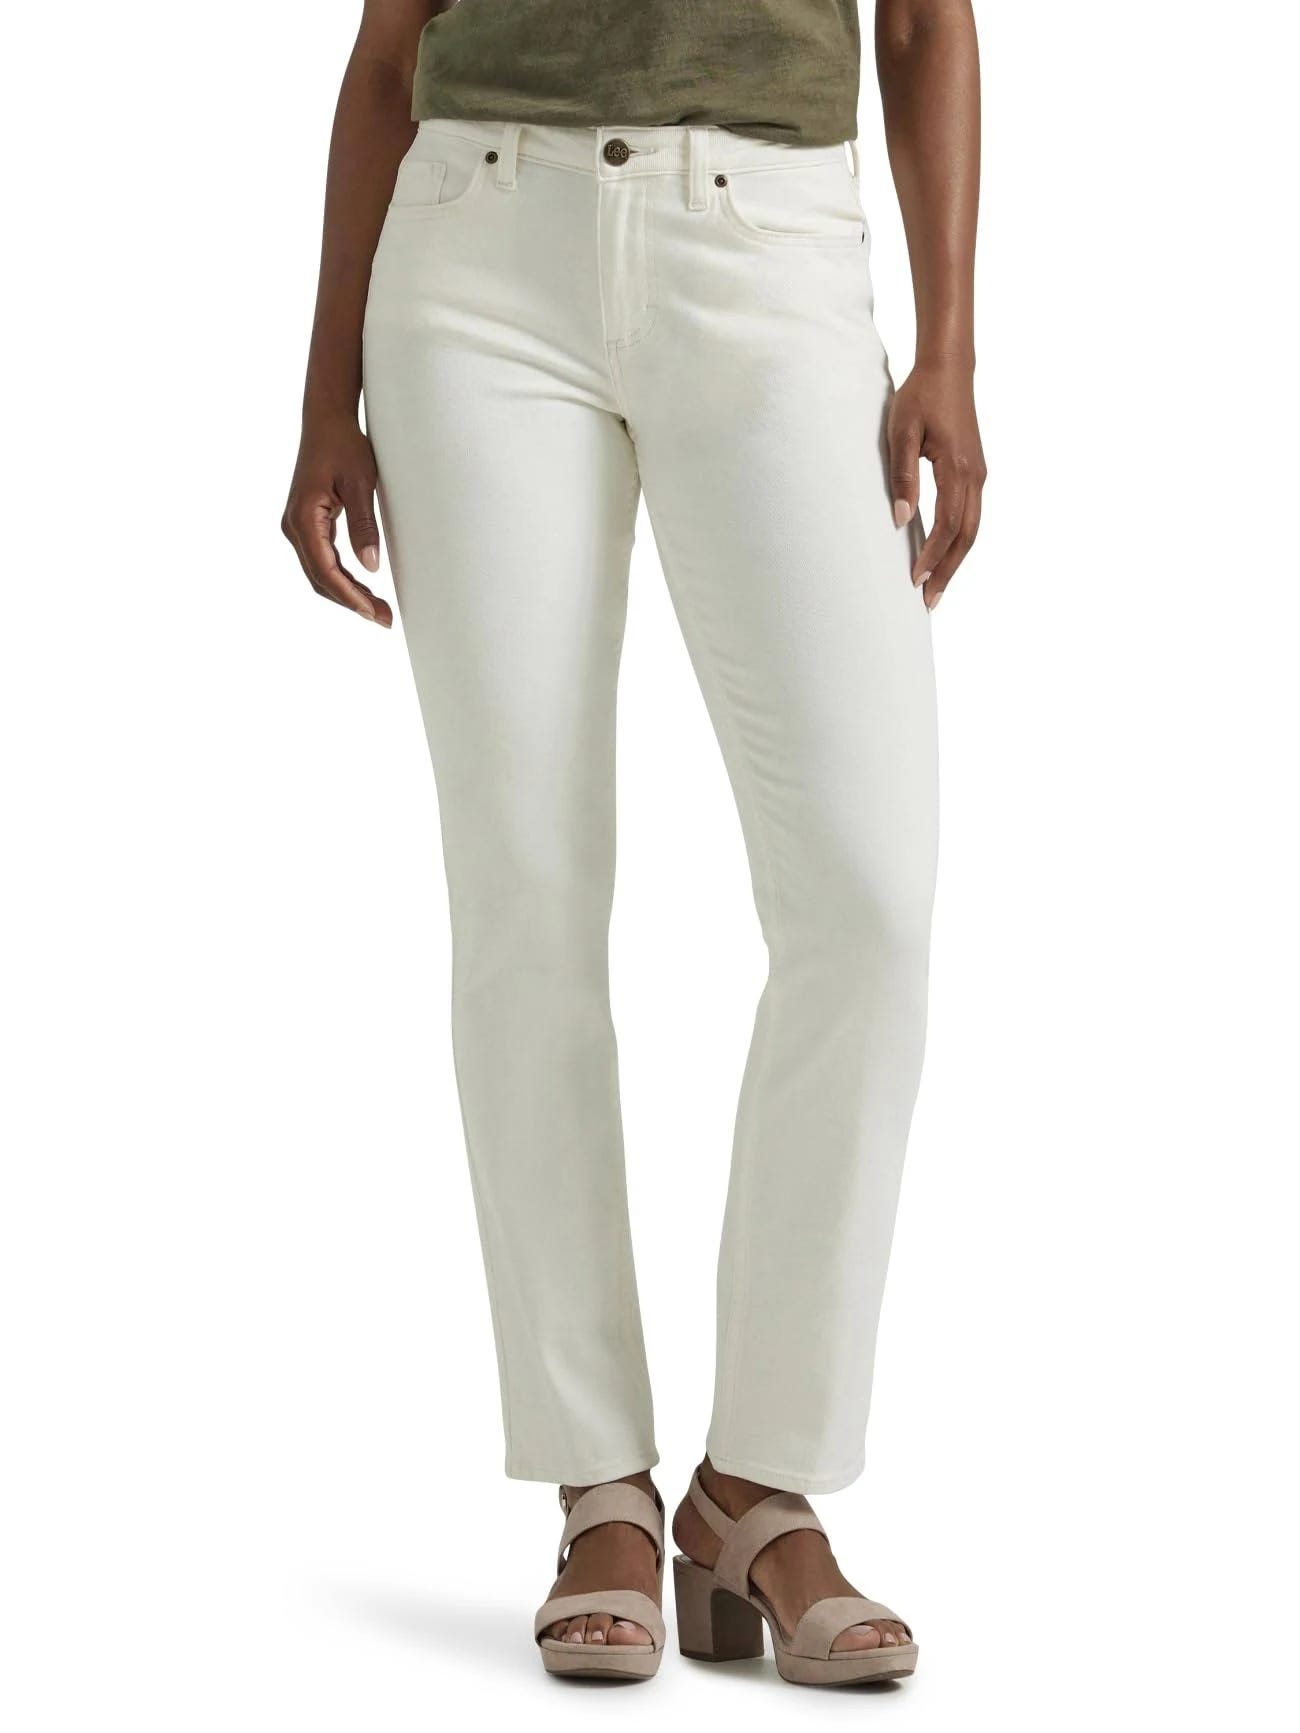 Lee Legendary Cotton Straight Leg Jeans for Women - Off White Play the straight game in style | Image